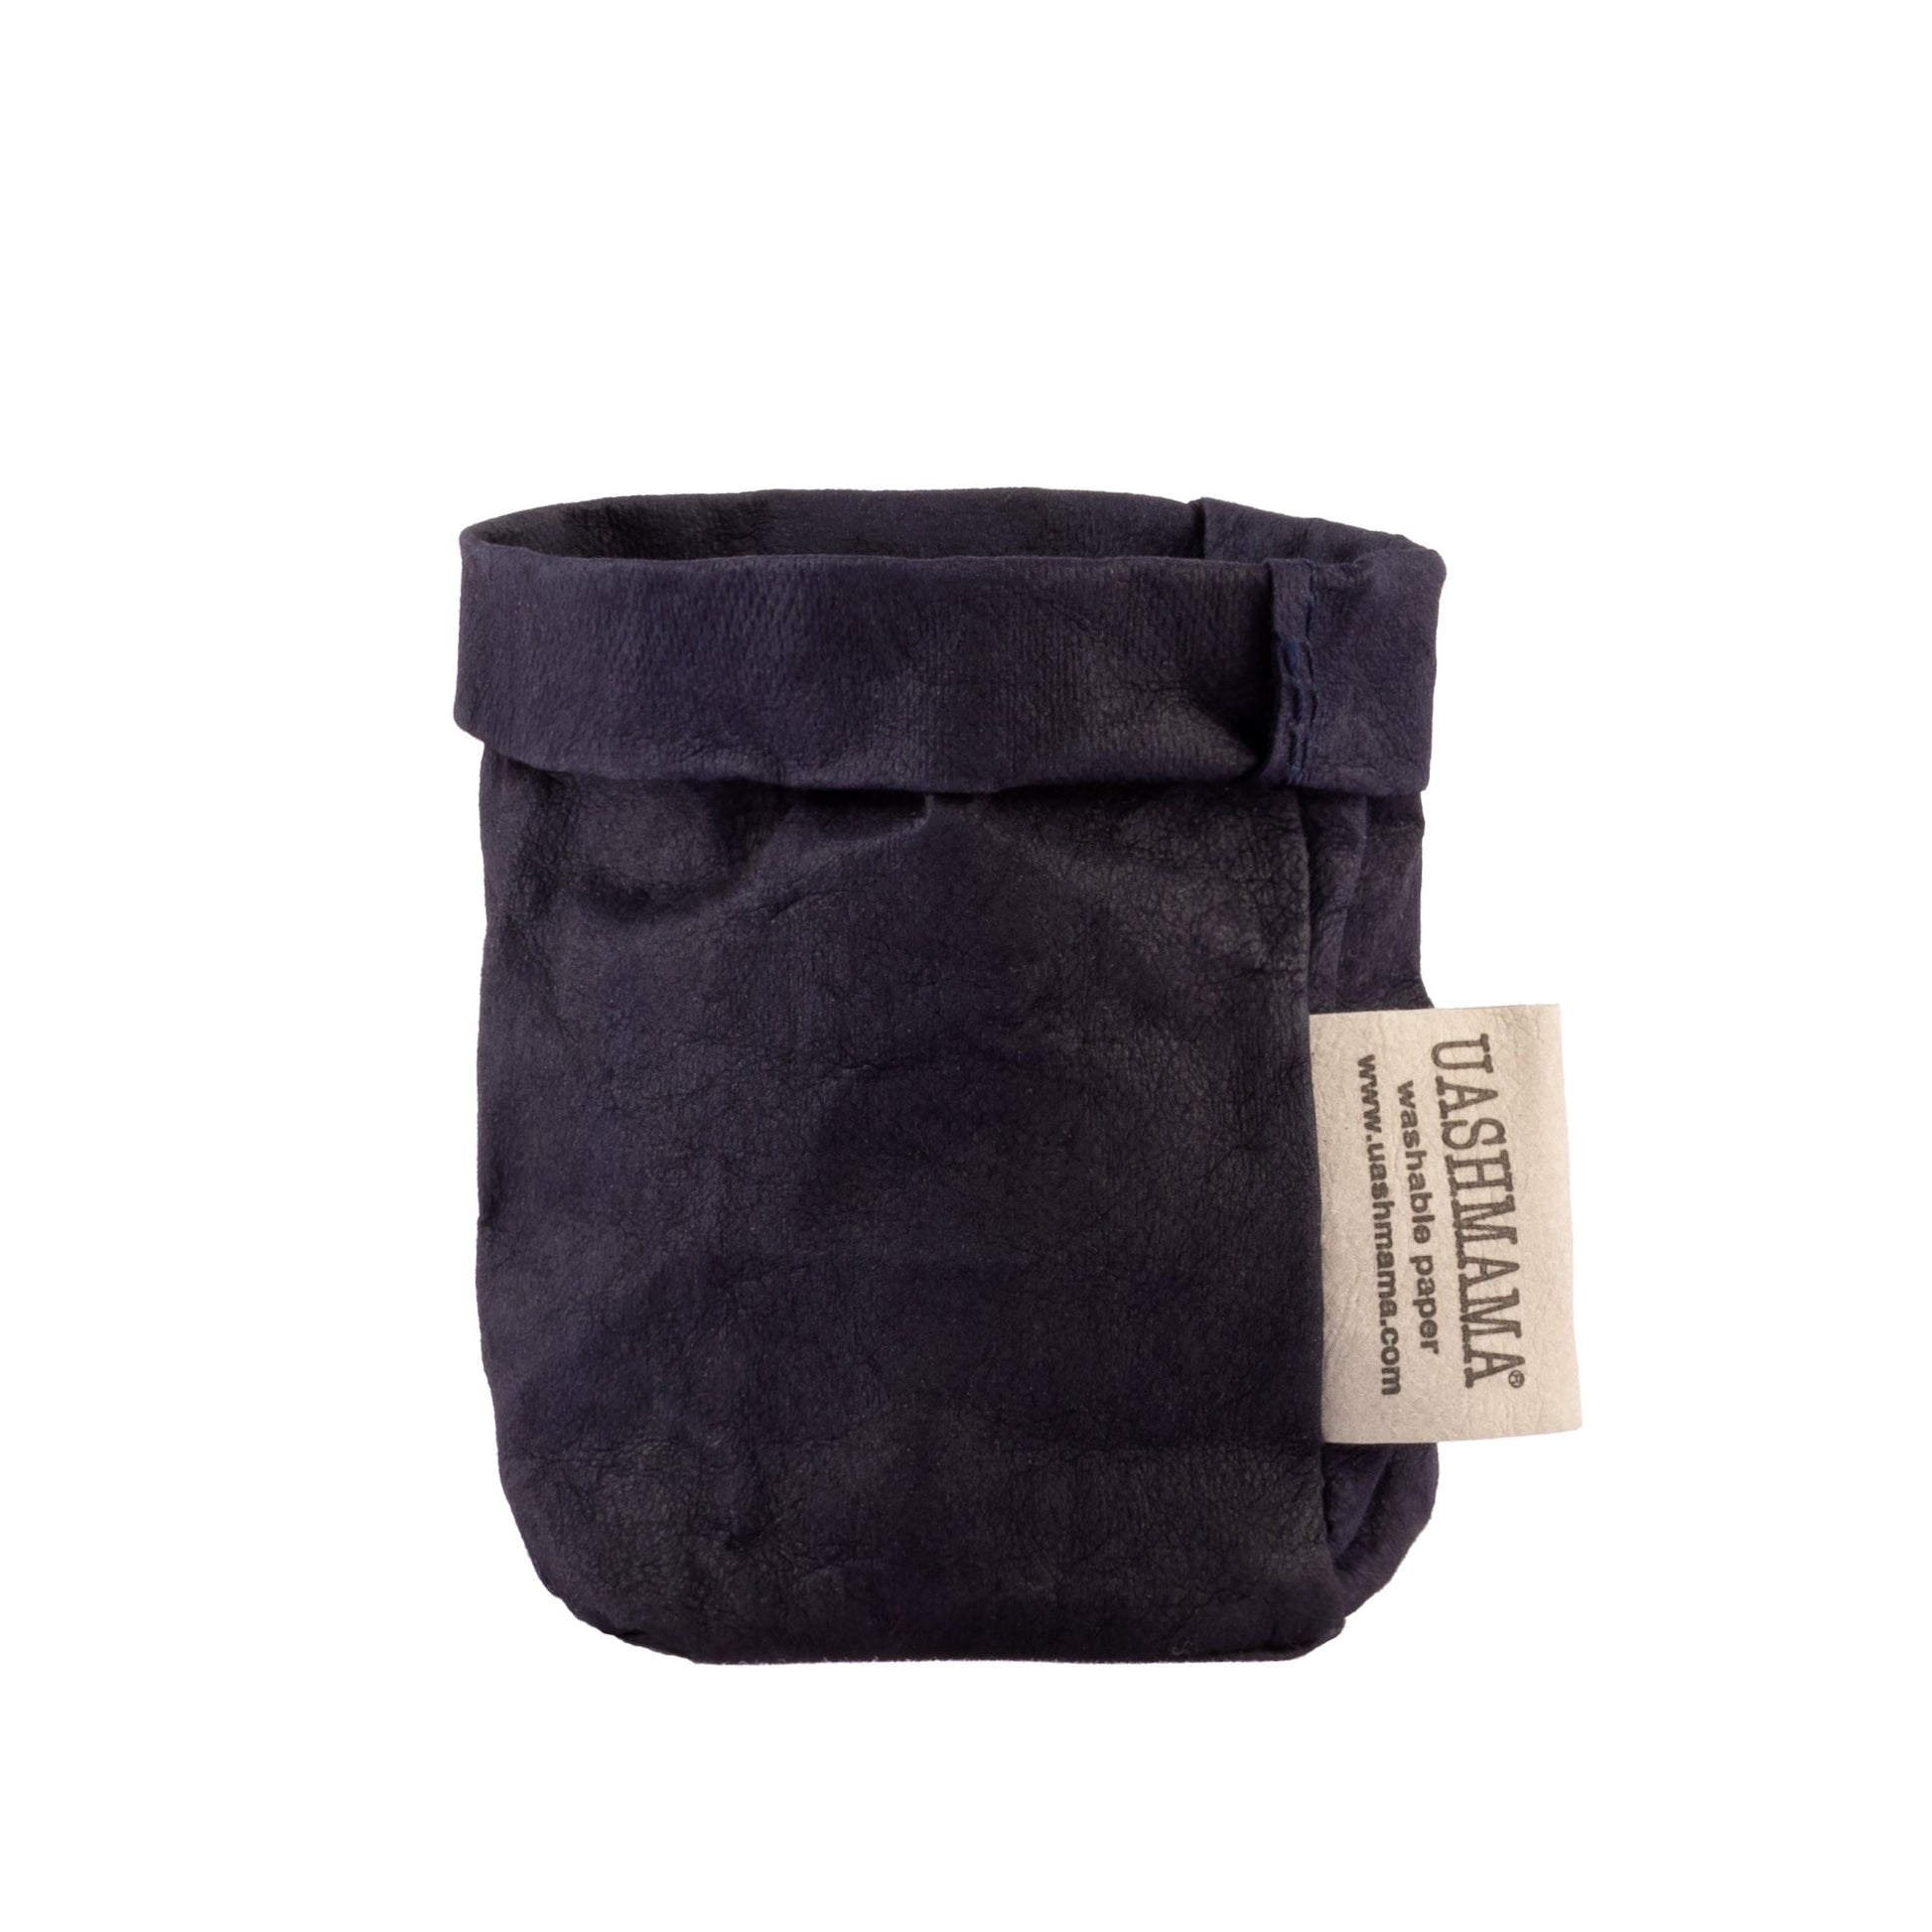 A washable paper bag is shown. The bag is rolled down at the top and features a UASHMAMA logo label on the bottom left corner. The bag pictured is the extra small size in dark blue.